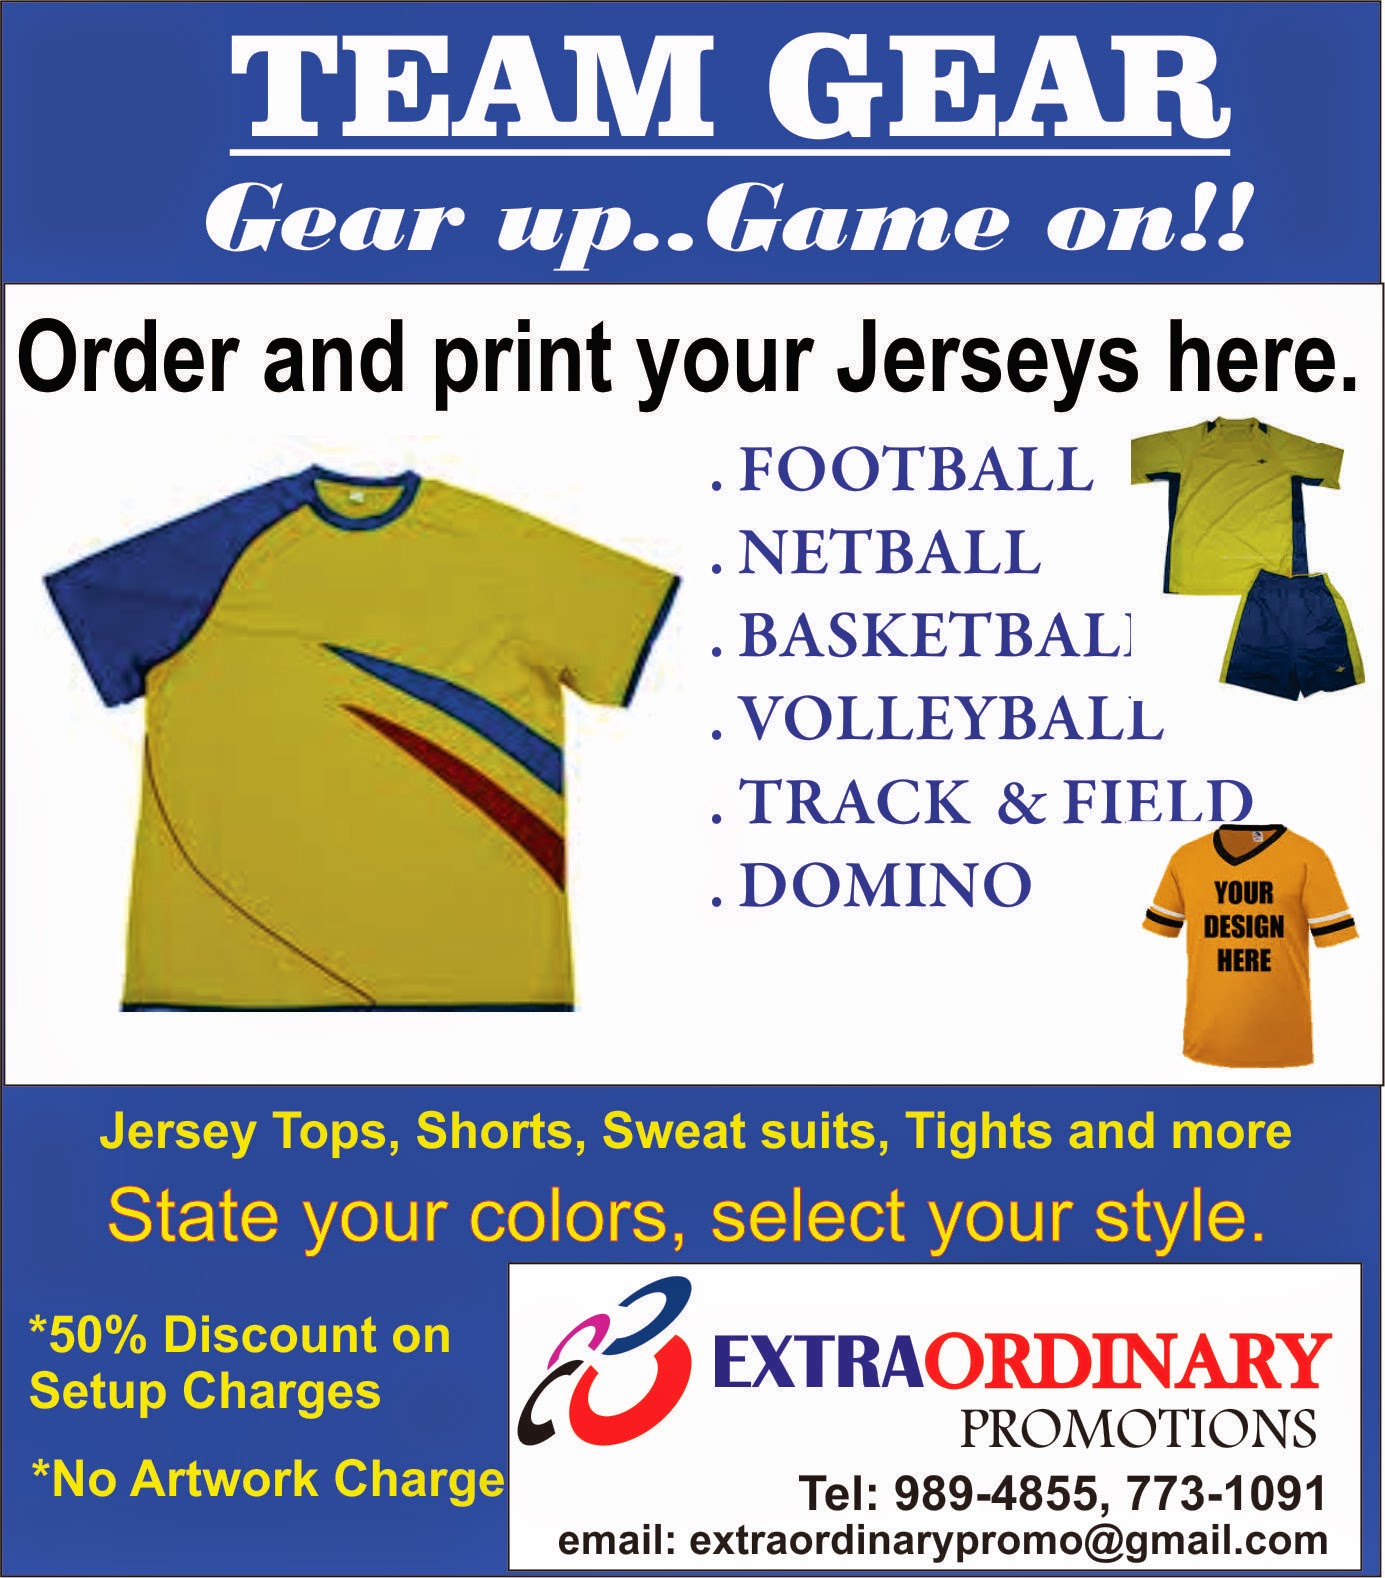 Extraordinary Promotions : Order and print your Jerseys here